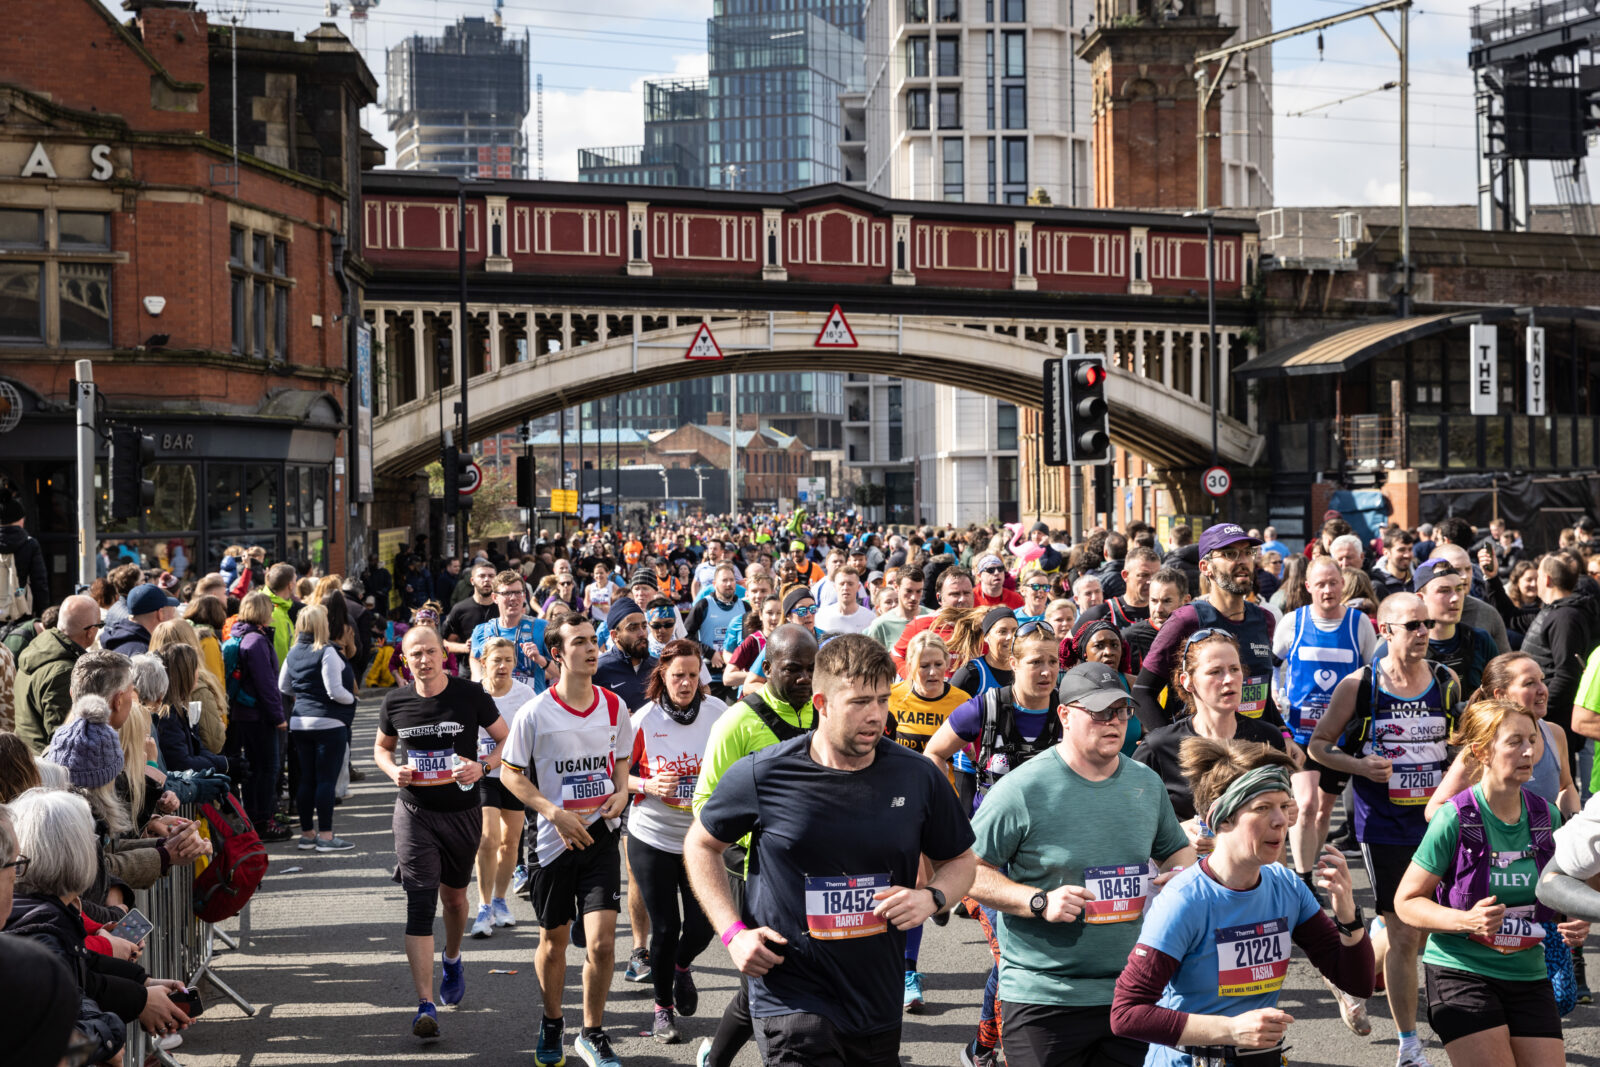 2023 Manchester Marathon Guide all you need to know for the big day